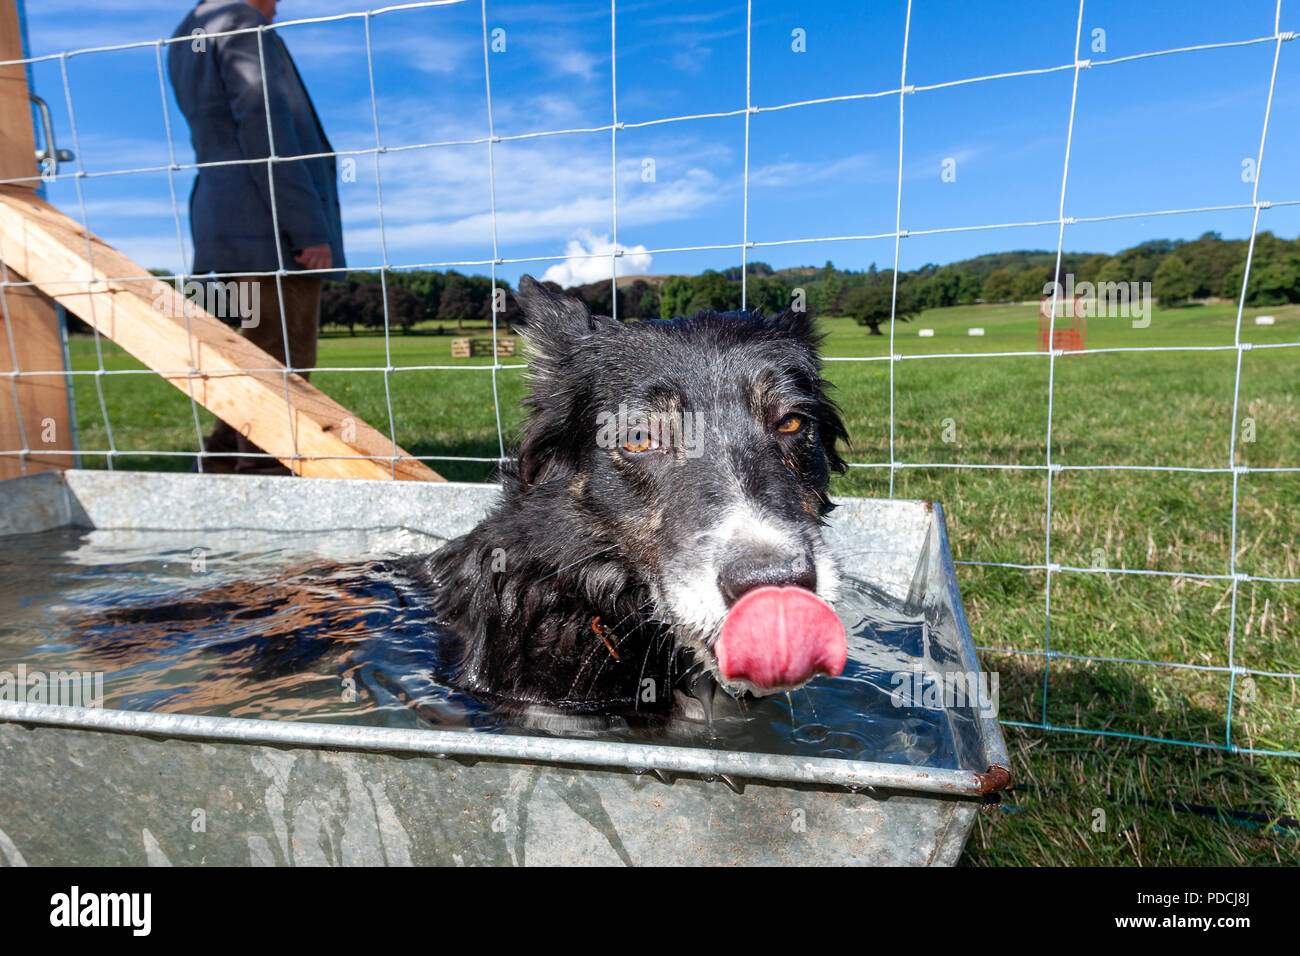 Nannerch, North Wales, . UK Weather: Hot and sunny weather perfect for the Welsh National Sheep Dog Trials being held in the rural village of Nannerch at the Penbedw Estate in Flintshire. A sheep dog called Brenig Taran relaxing in the cold water provided for the dogs to cool down after competing at the National Sheep Dog Trials in the hot weather, Nannerch, Flintshire Stock Photo